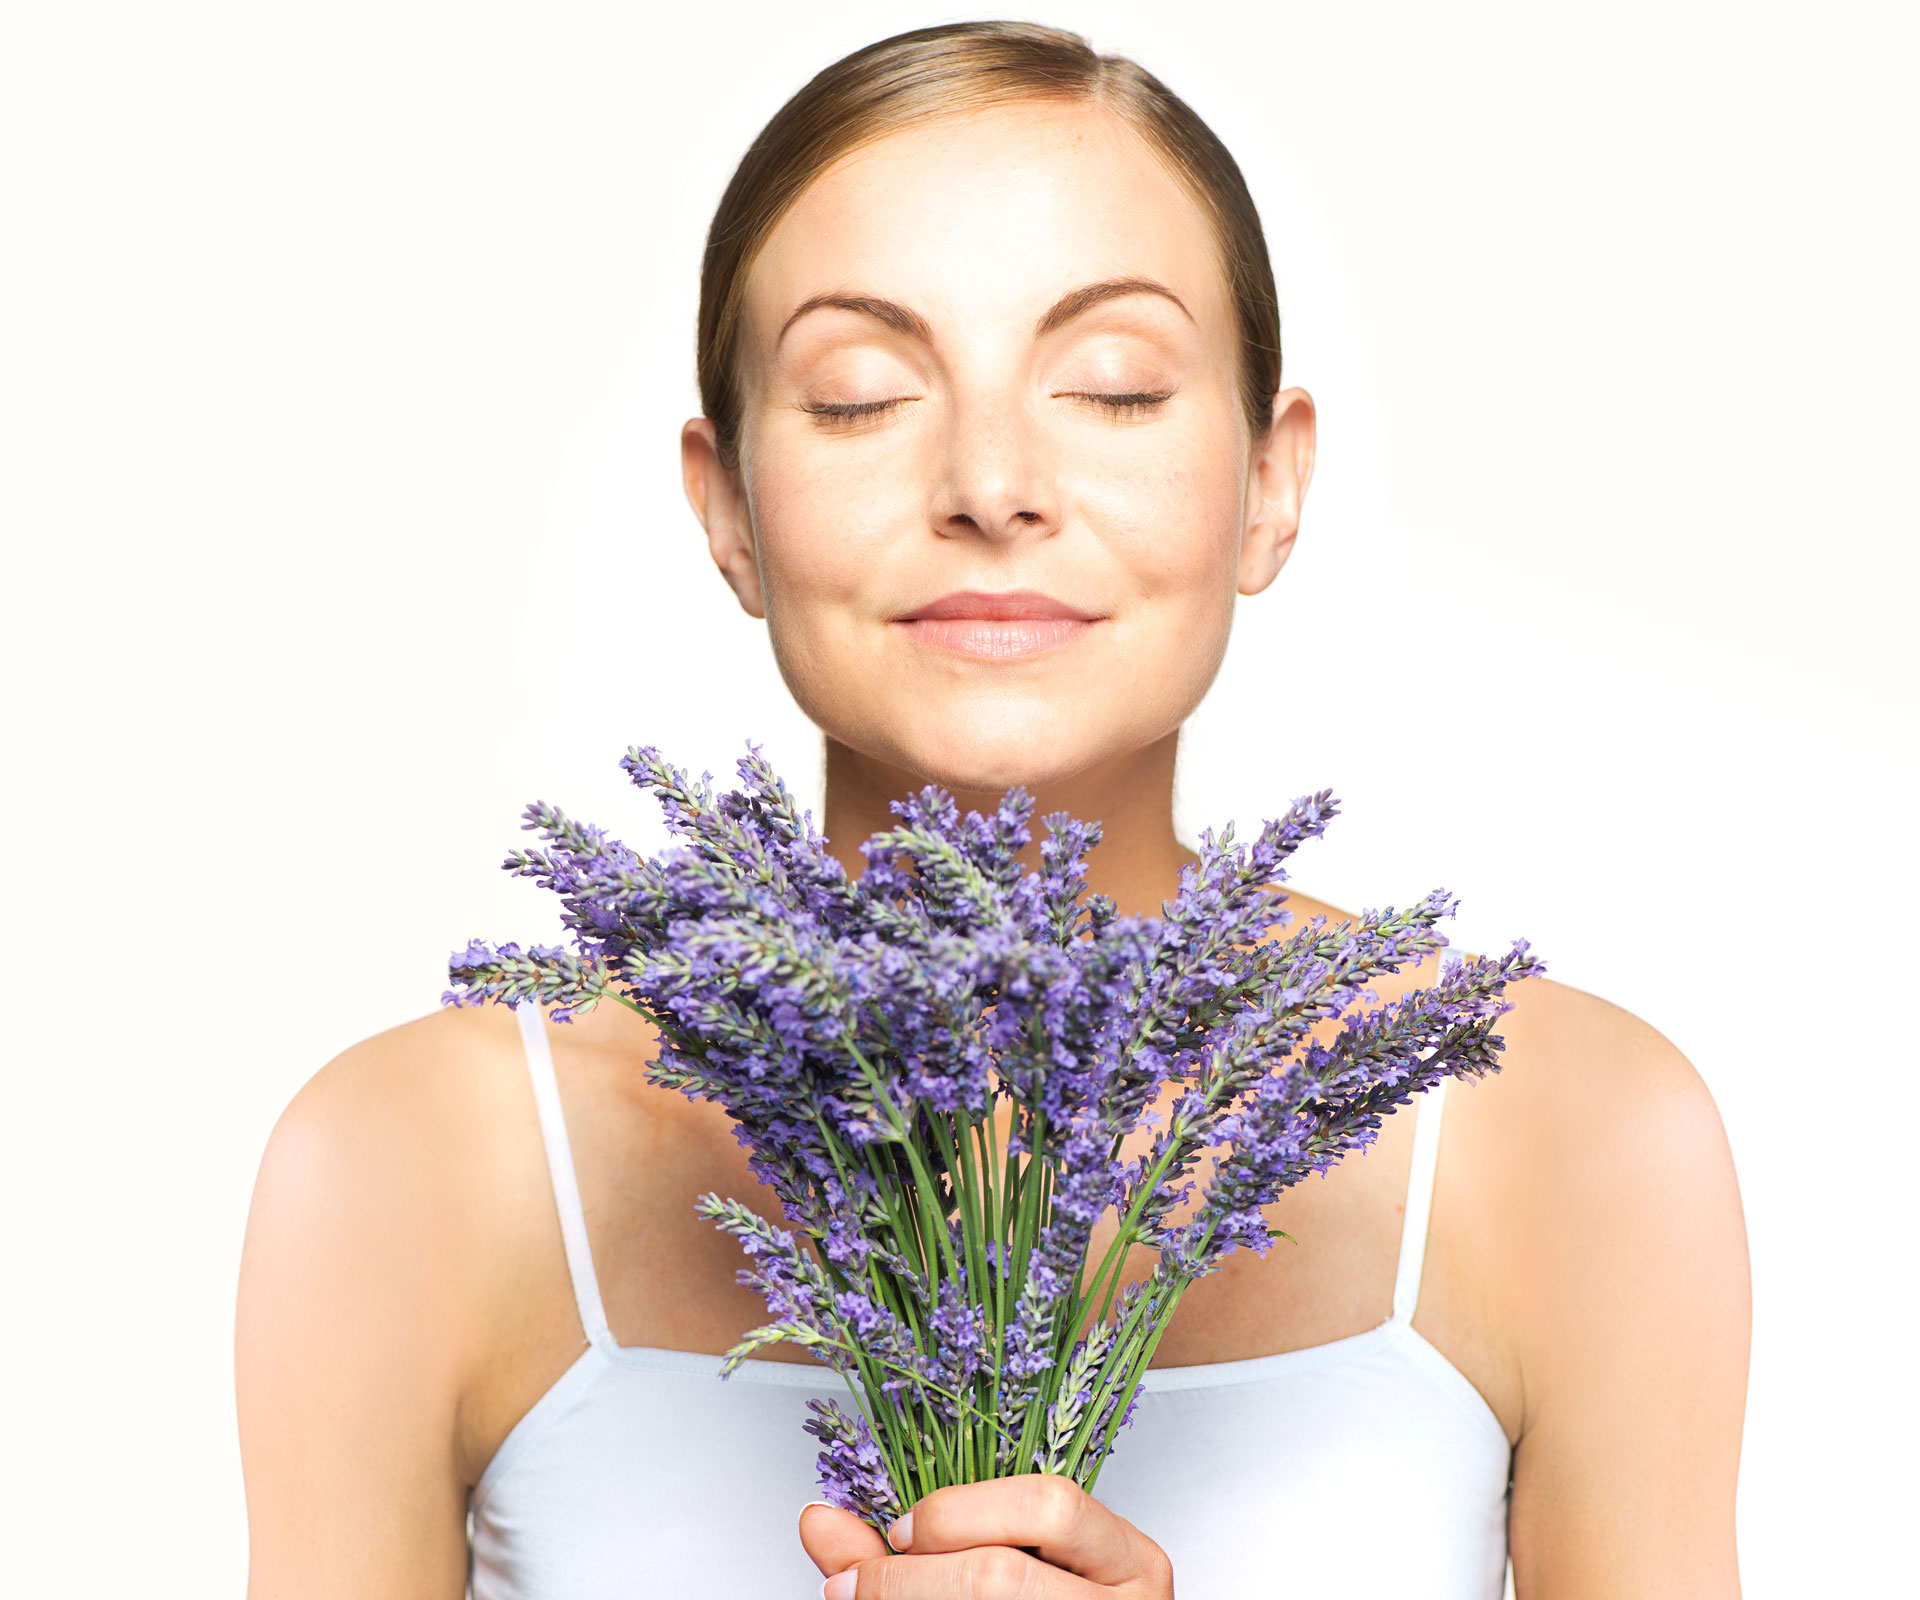 8 clever uses for lavender oil